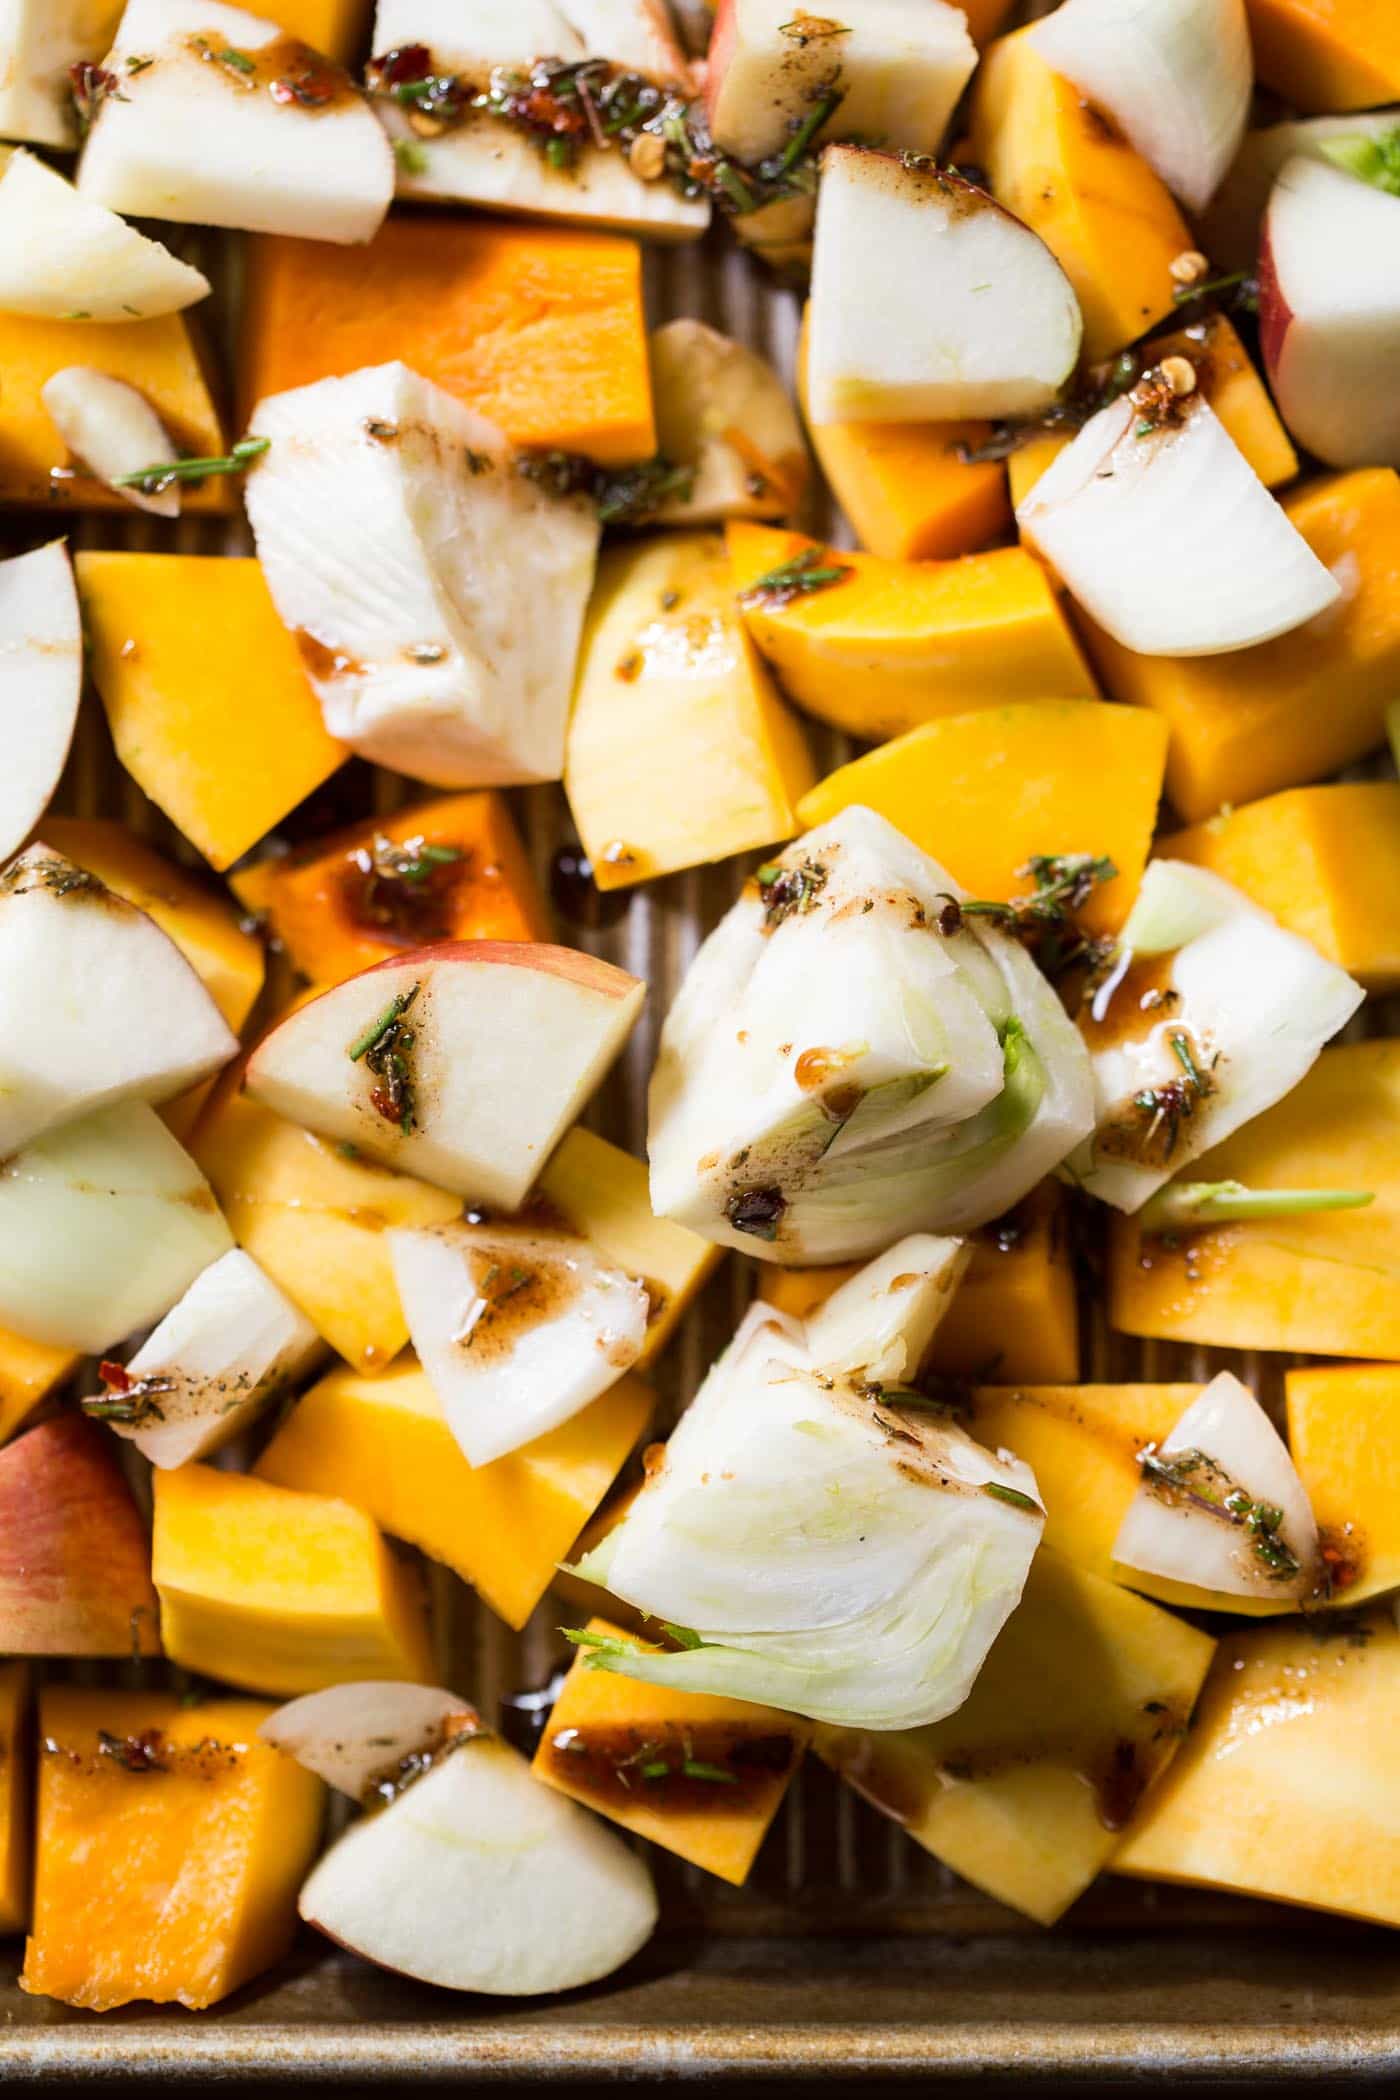 Roasted vegetables are the perfect base for this Butternut Squash & Apple Soup!